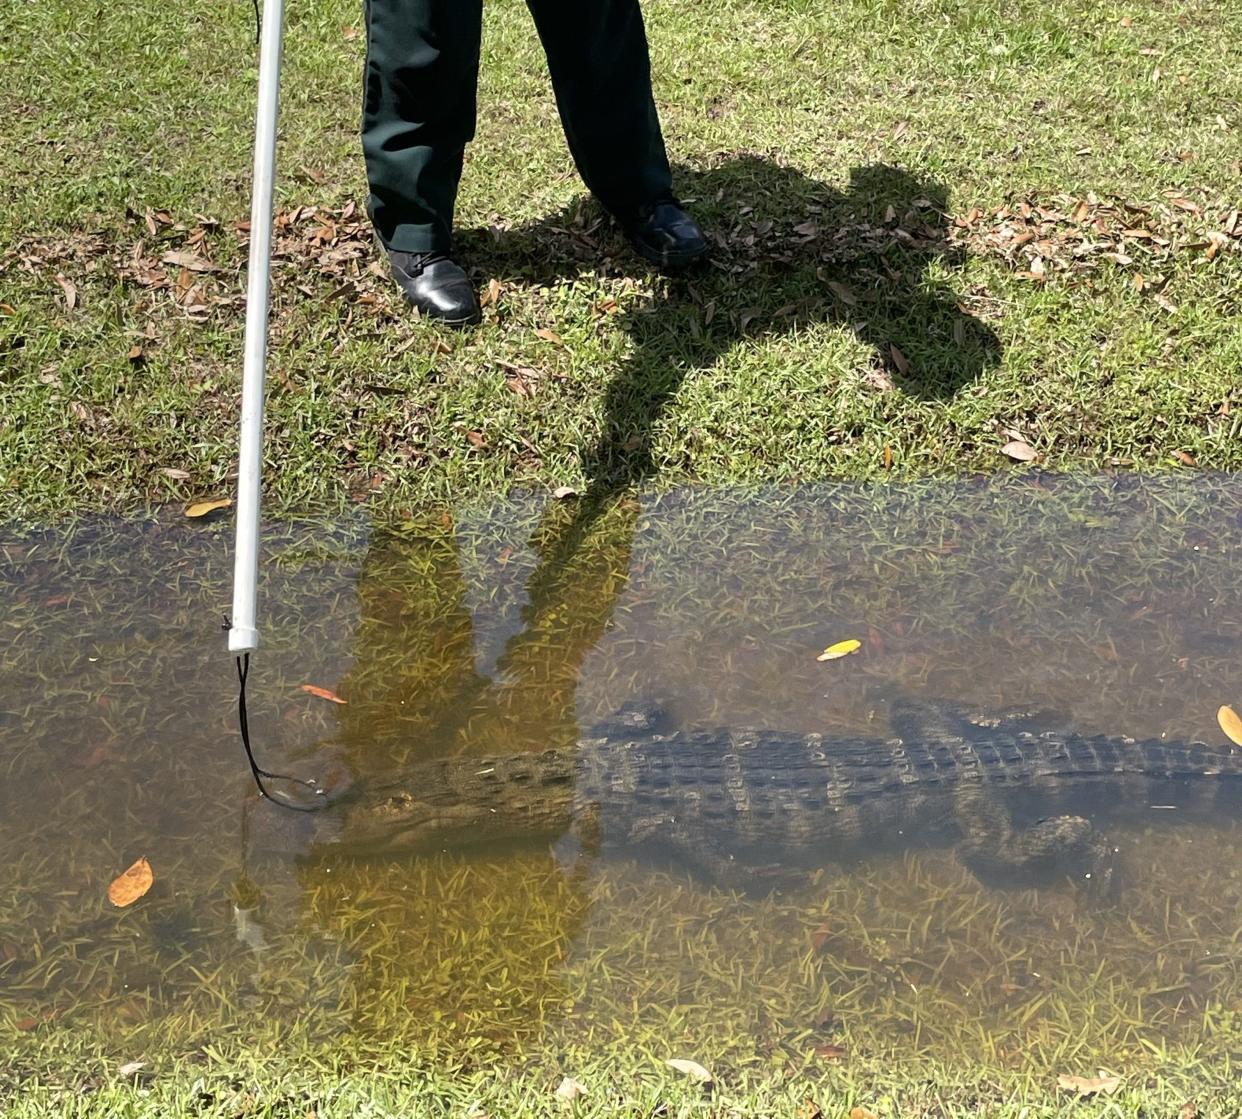 Leon County residents of all species were impacted by Wednesday night's storm as one gator ended up far from home on Shady Oaks Drive.